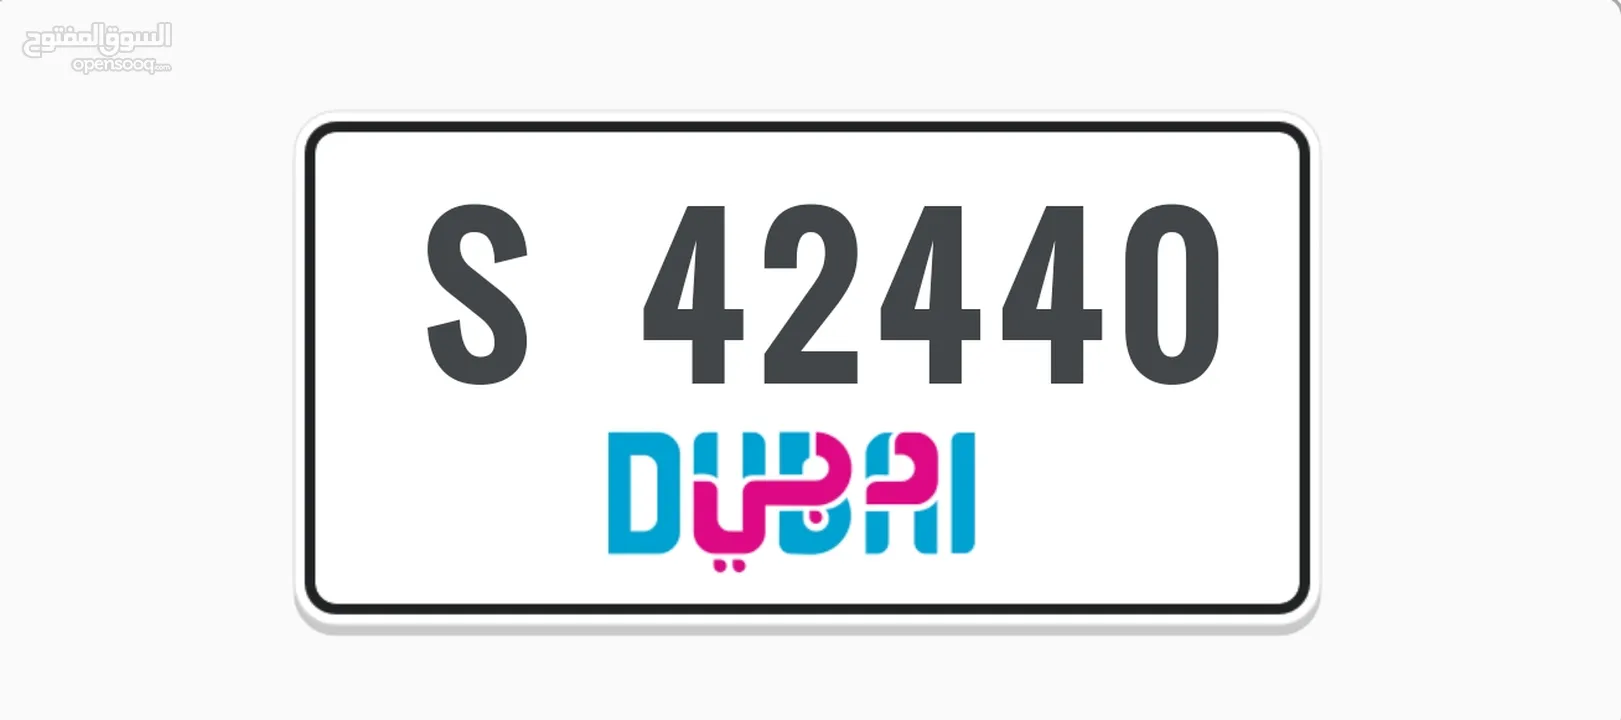 Dubai number plate for sale